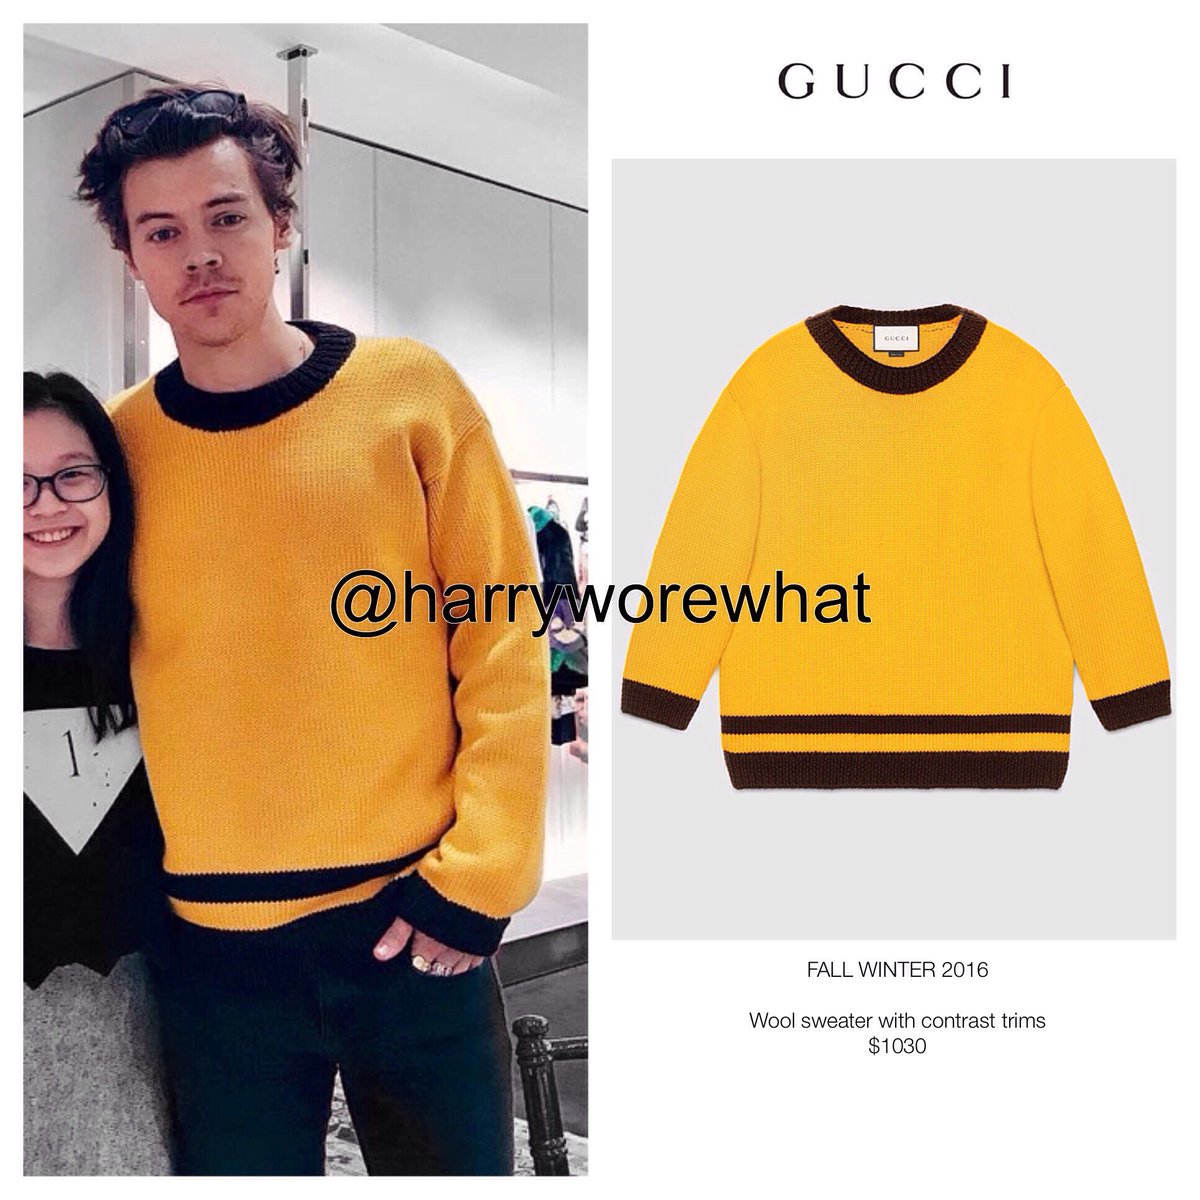 Harry wore a $1030 #Gucci 'Wool sweater 